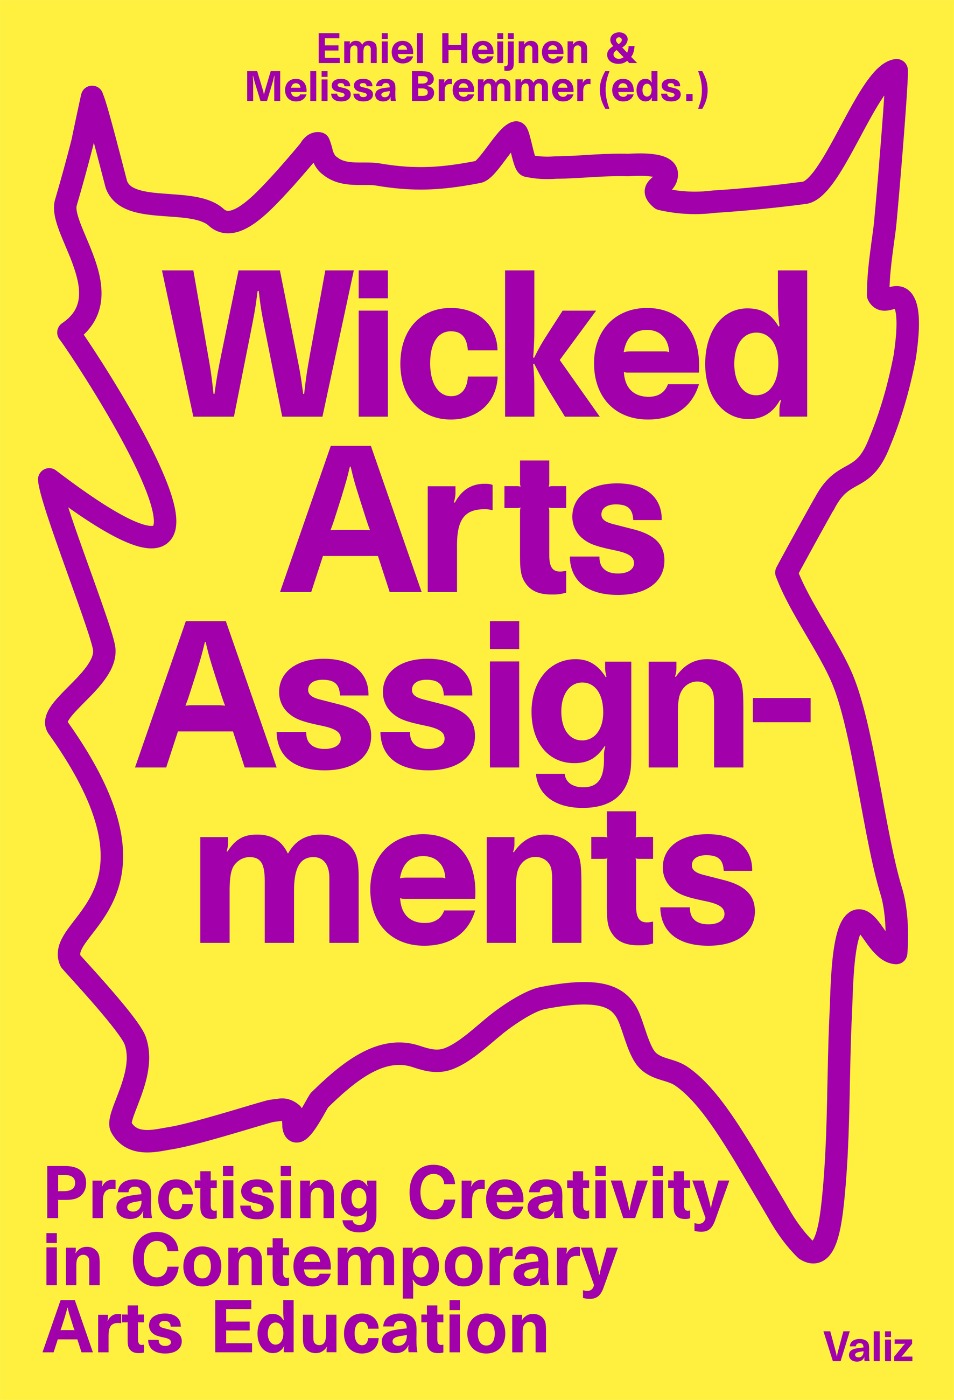 Wicked Arts Assignments – Practising Creativity in Contemporary Arts Education